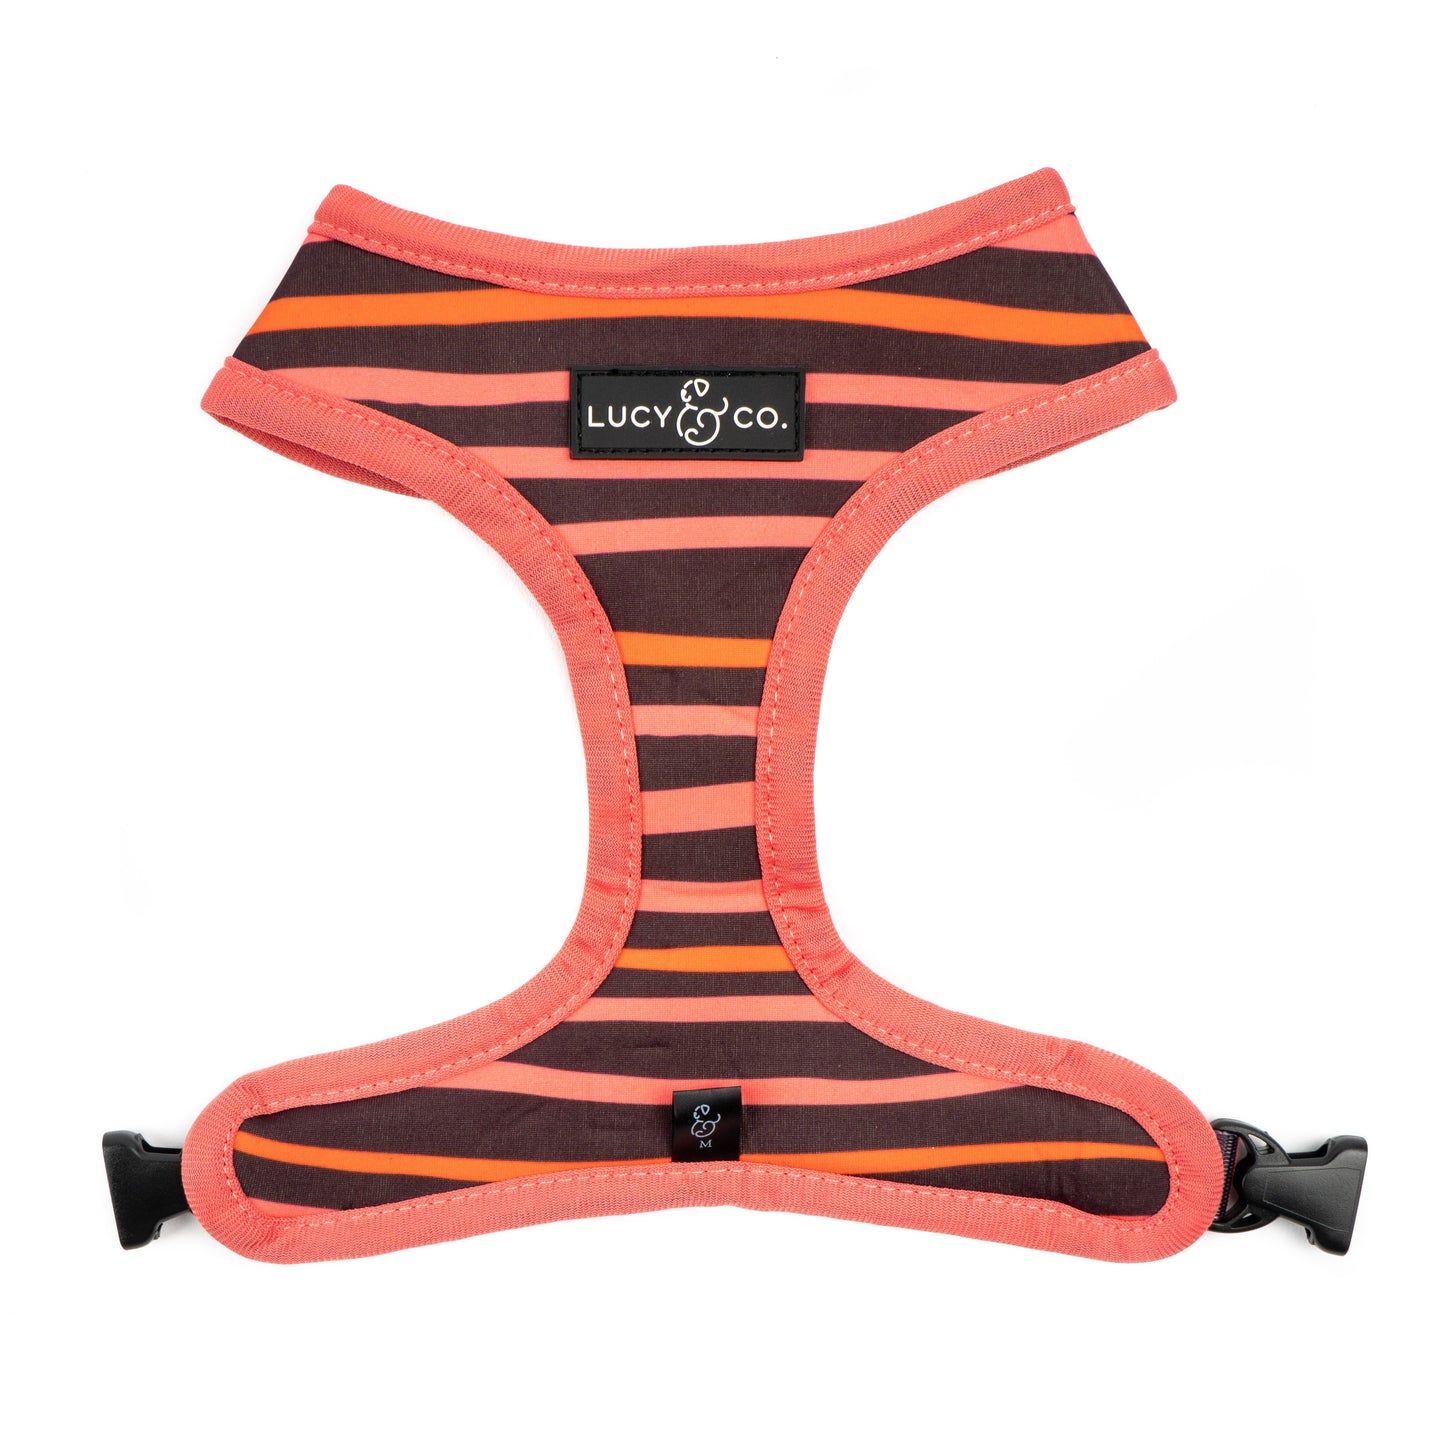 The Posy Pink Reversible Harness